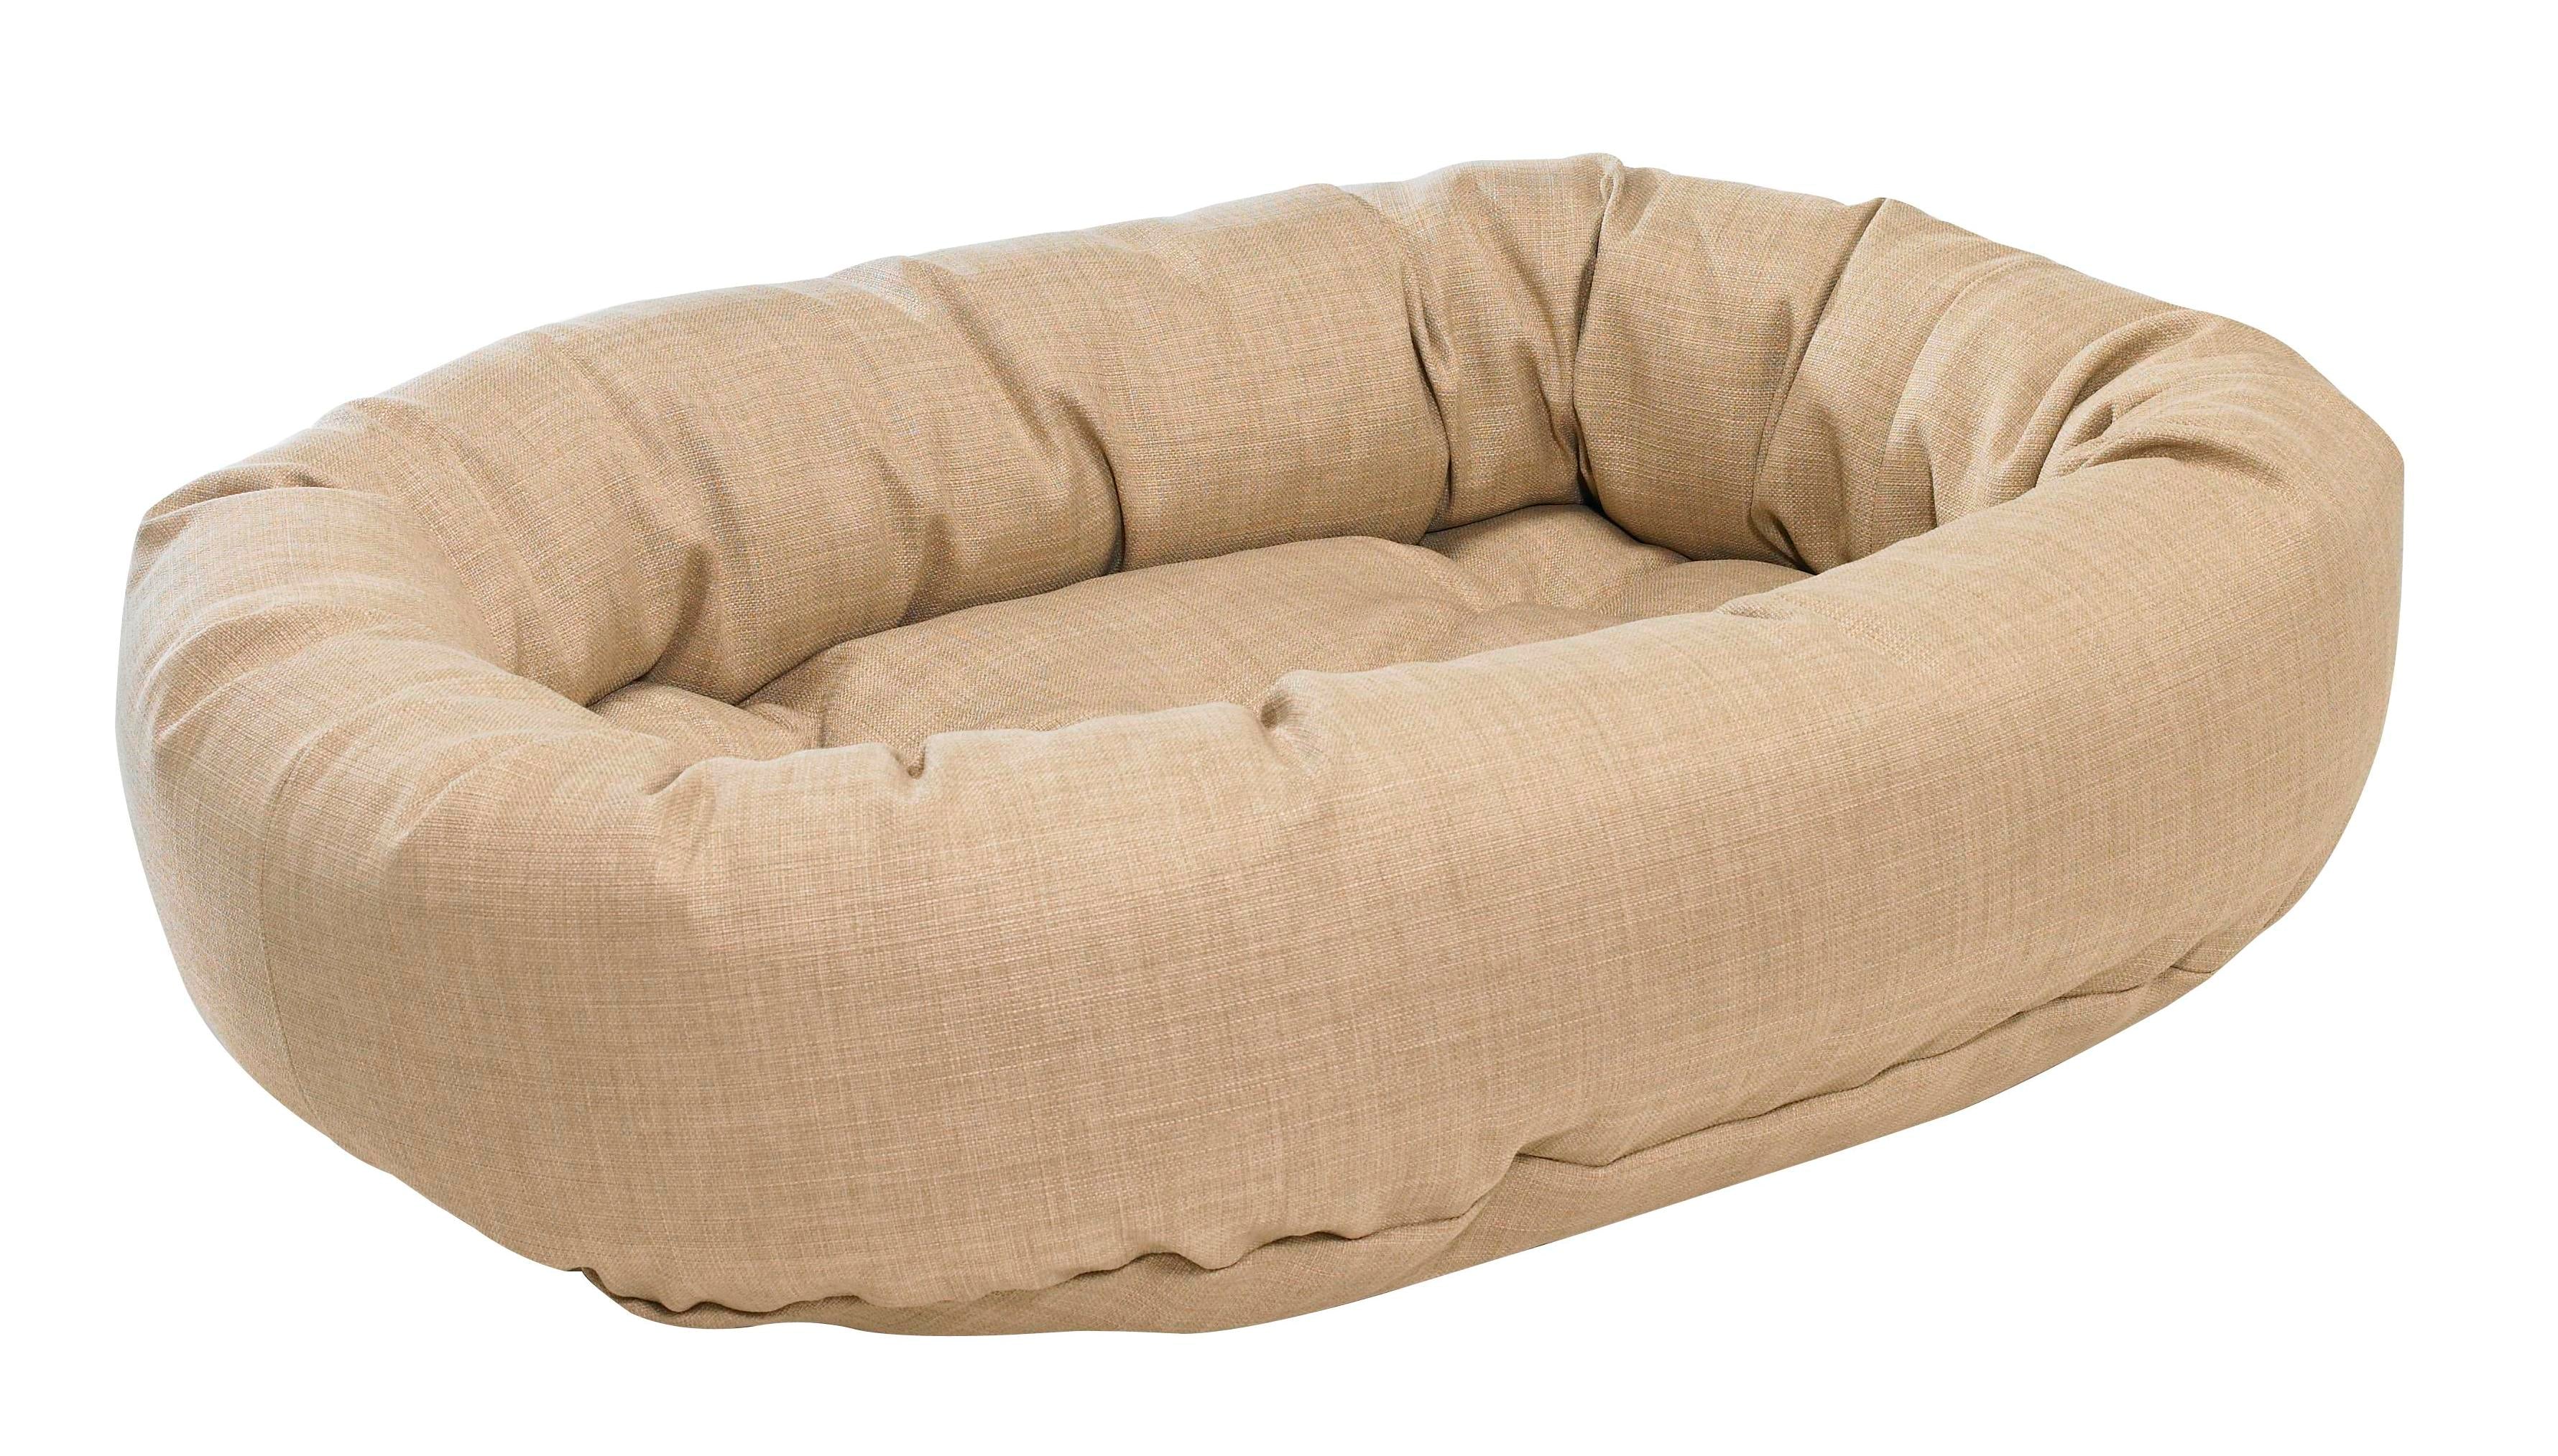 Microvelvet - Donut Bed - Flax - Dog Bed